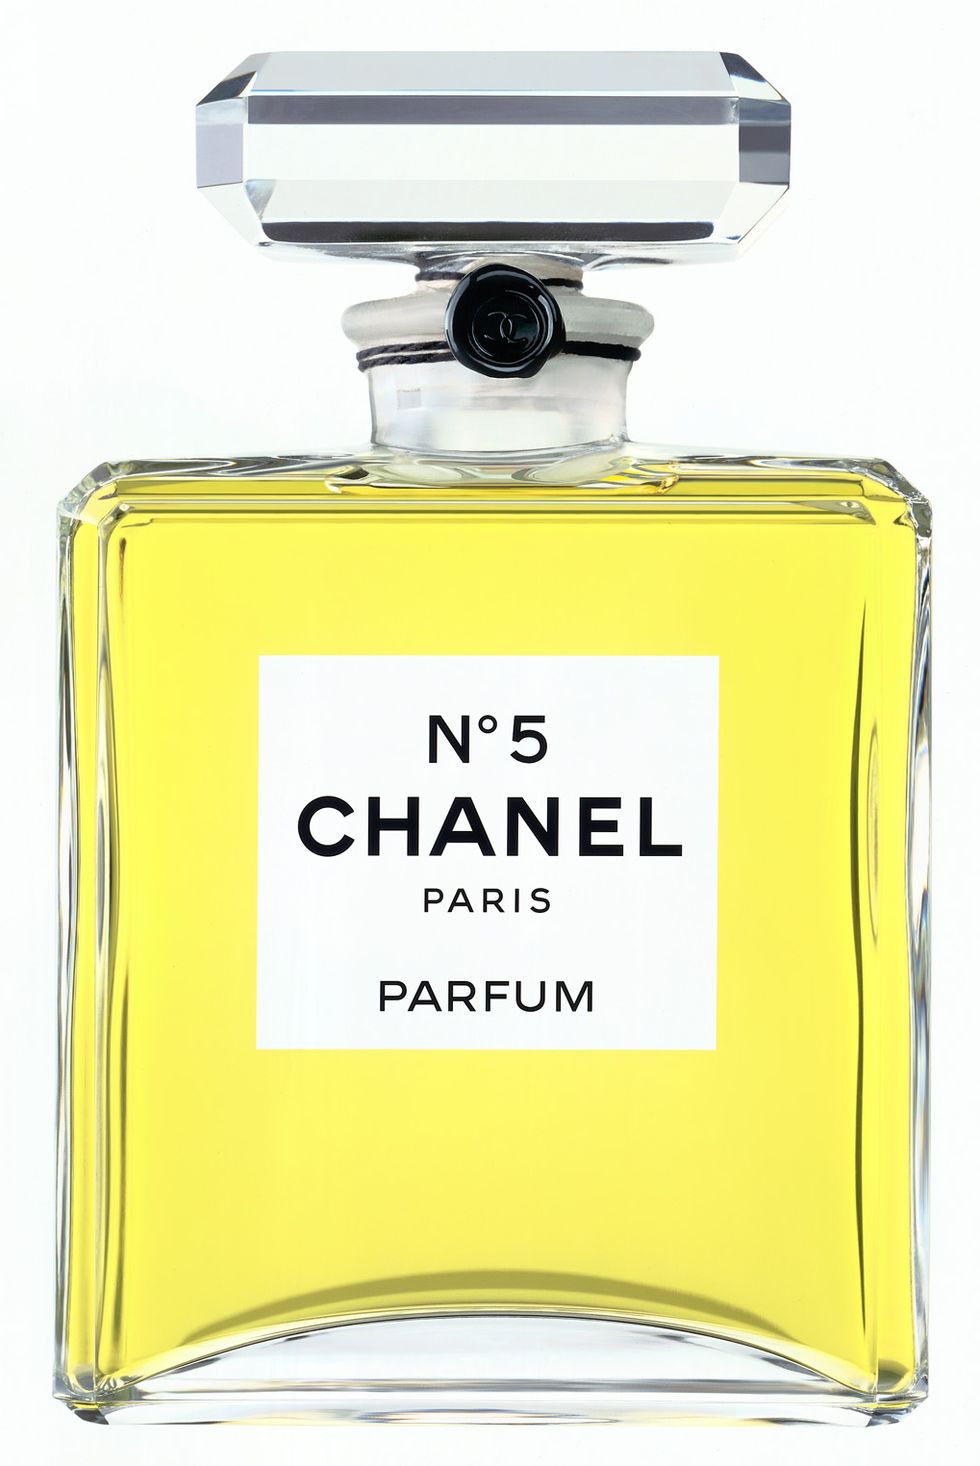 History of Famous Perfumes - The Stories Behind Chanel No 5, White Diamonds  and More